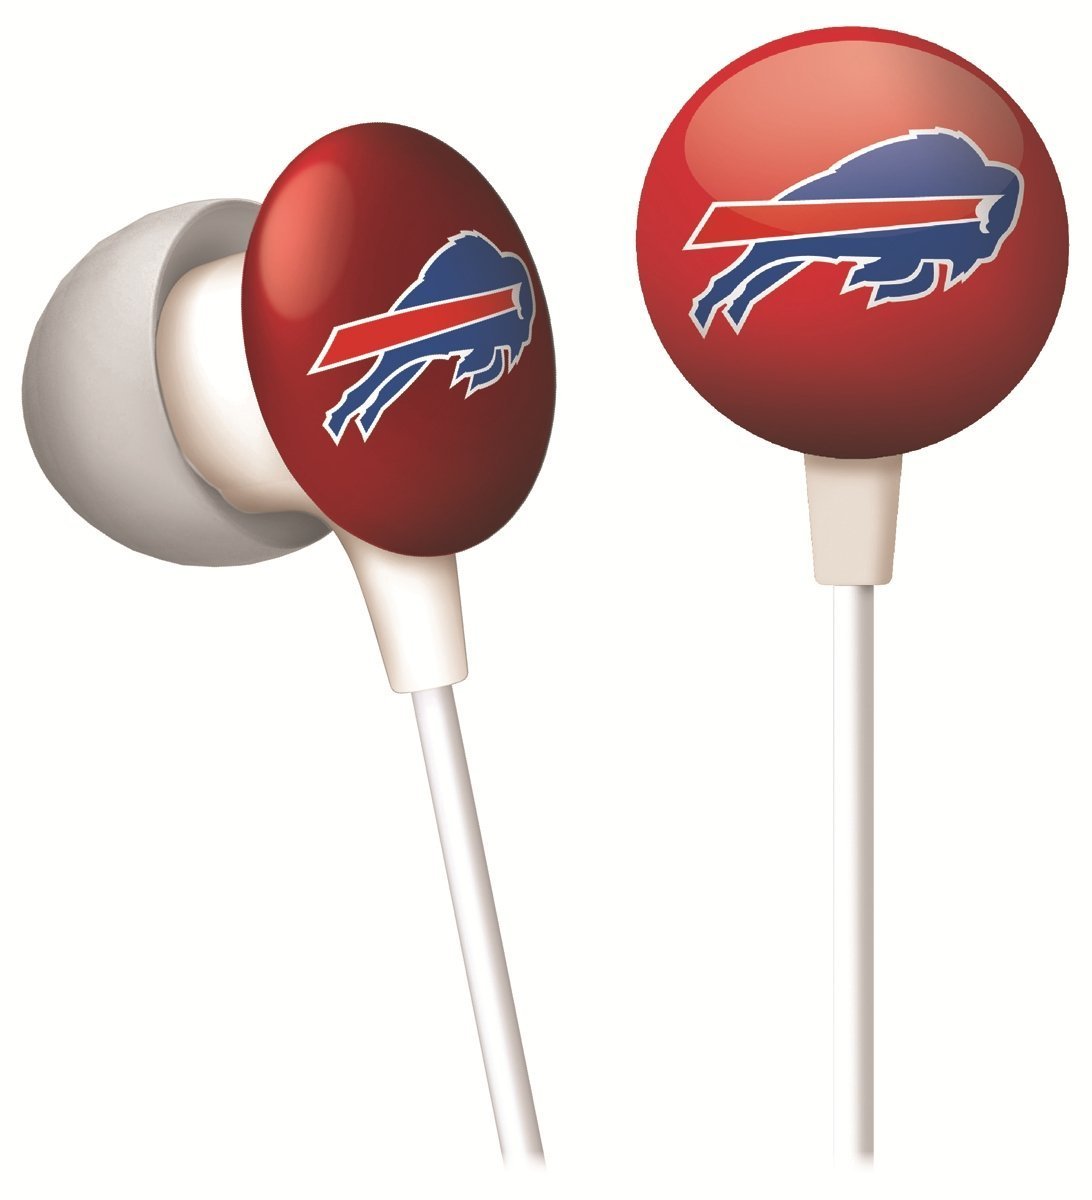 Official National Football League Fan Shop Authentic NFL Earbud Headphones and 2-pack Silicone Rubber Team Wristband Bundle Set